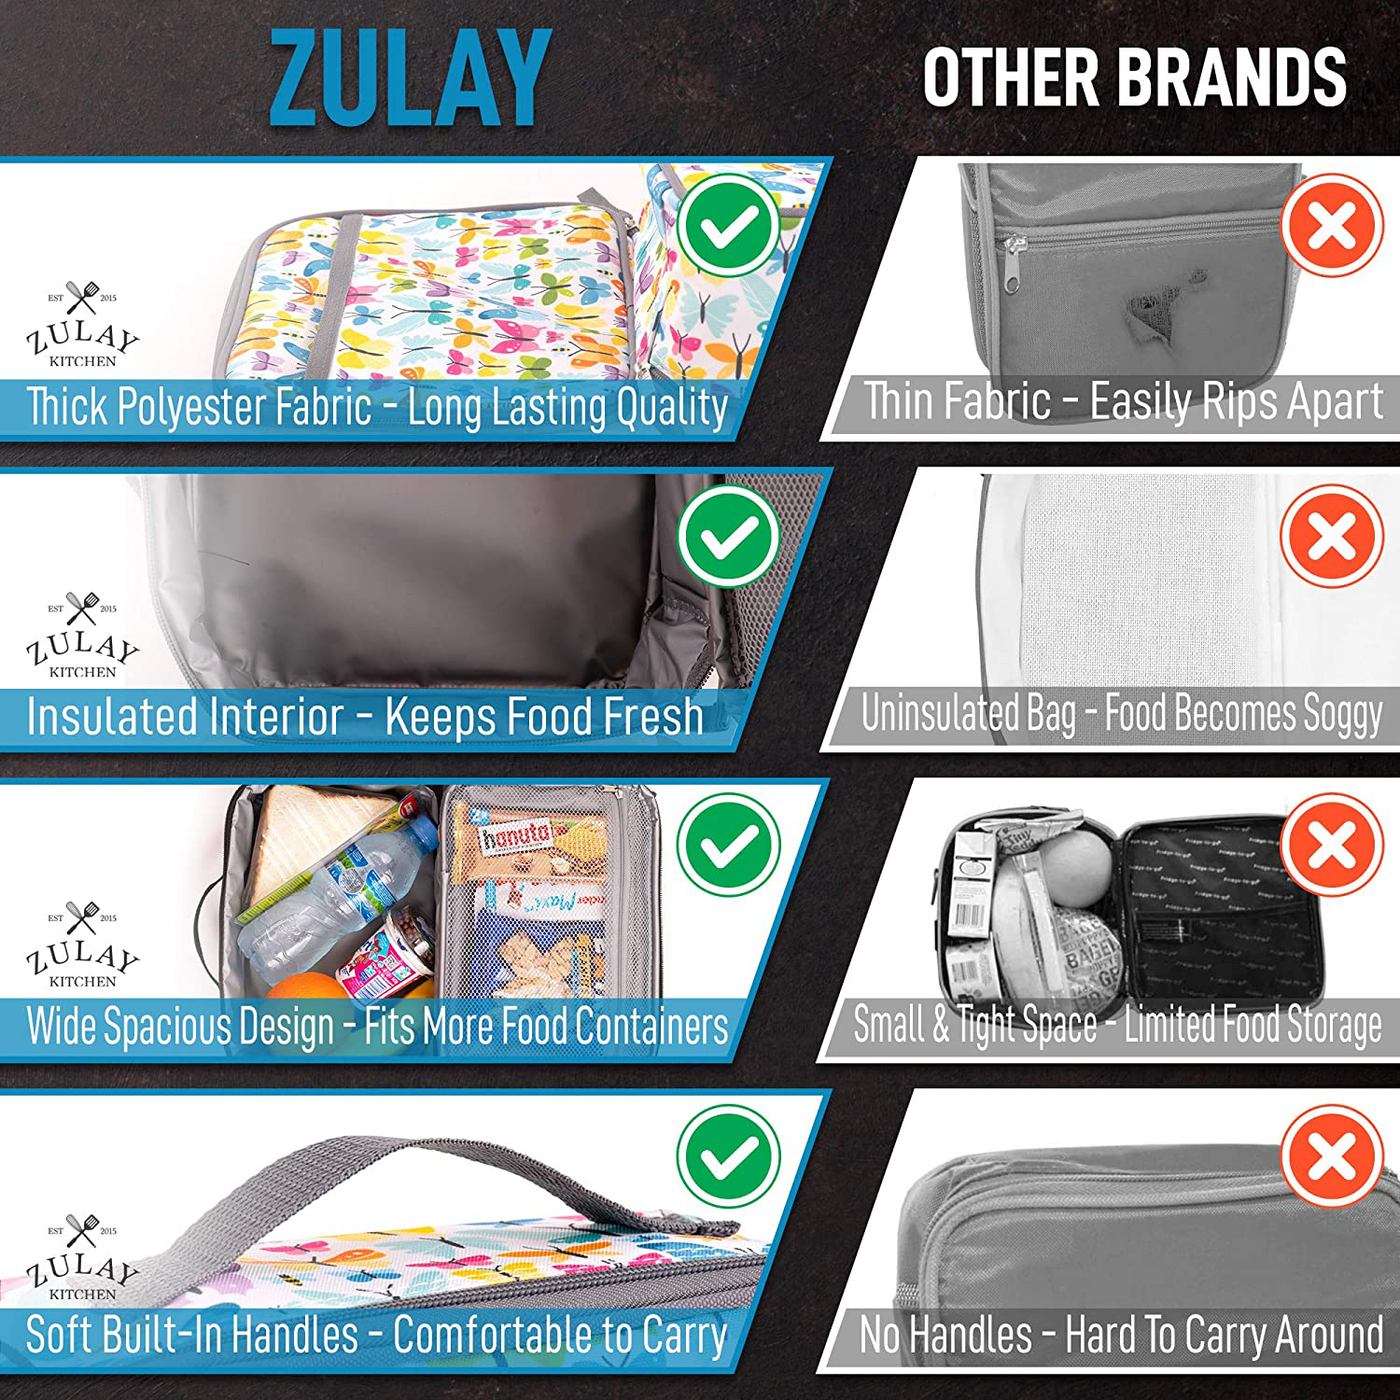 Zulay Insulated Lunch Bag - Thermal Kids Lunch Bag With Spacious Compartment & Built-In Handle - Portable Back To School Lunch Bag For Kids, Boys, & Girls To Keep Food Fresh (Dinosaurs)